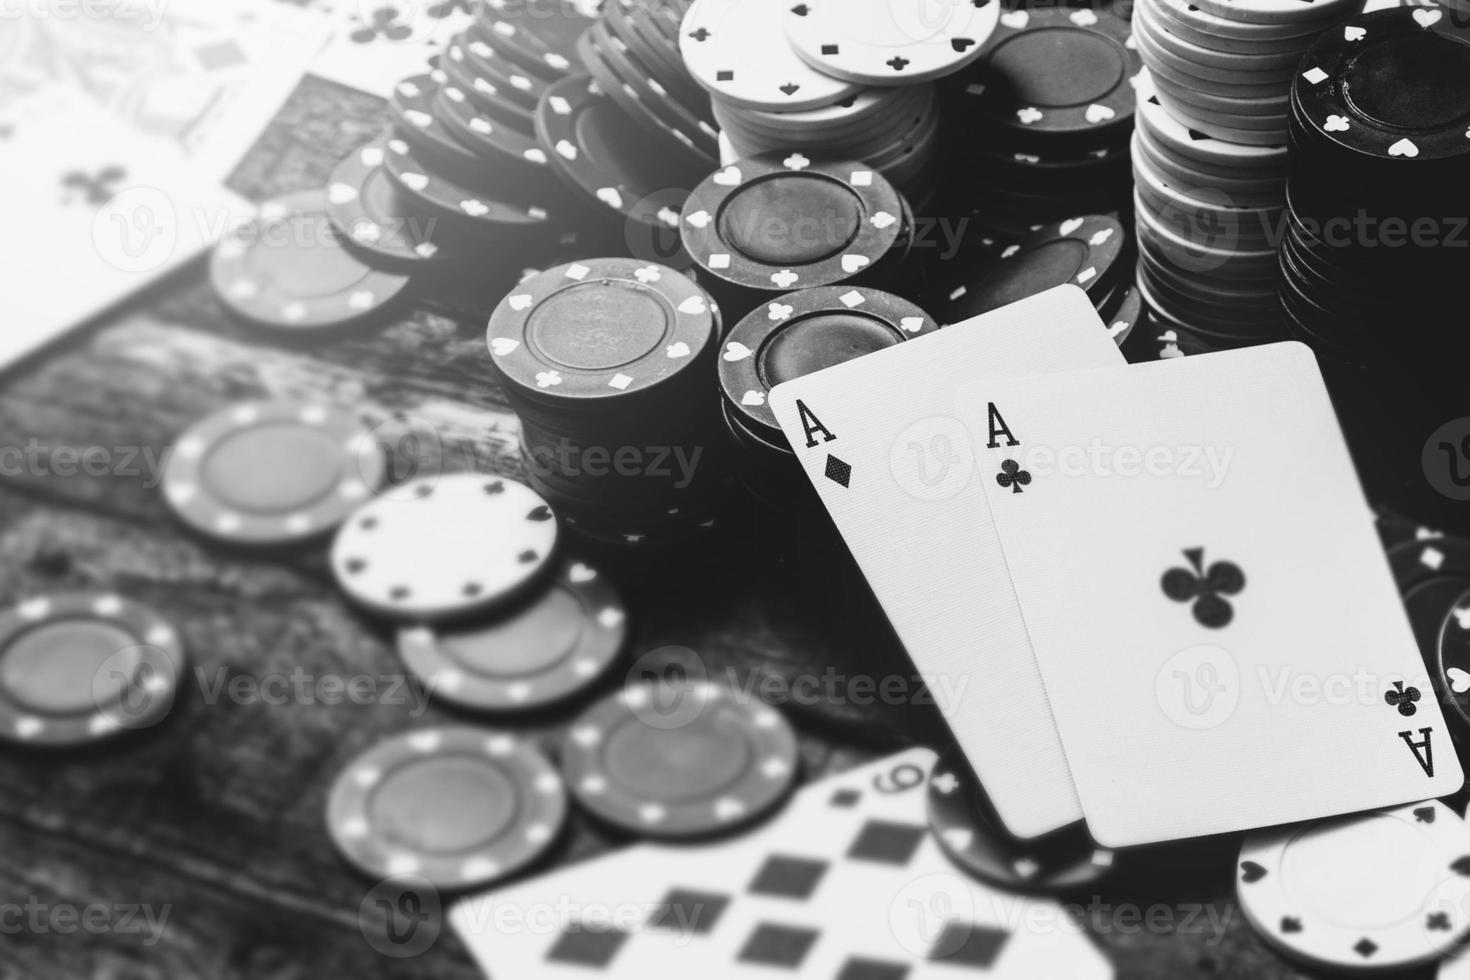 Monochrome image of two aces and a lot of casino chips photo